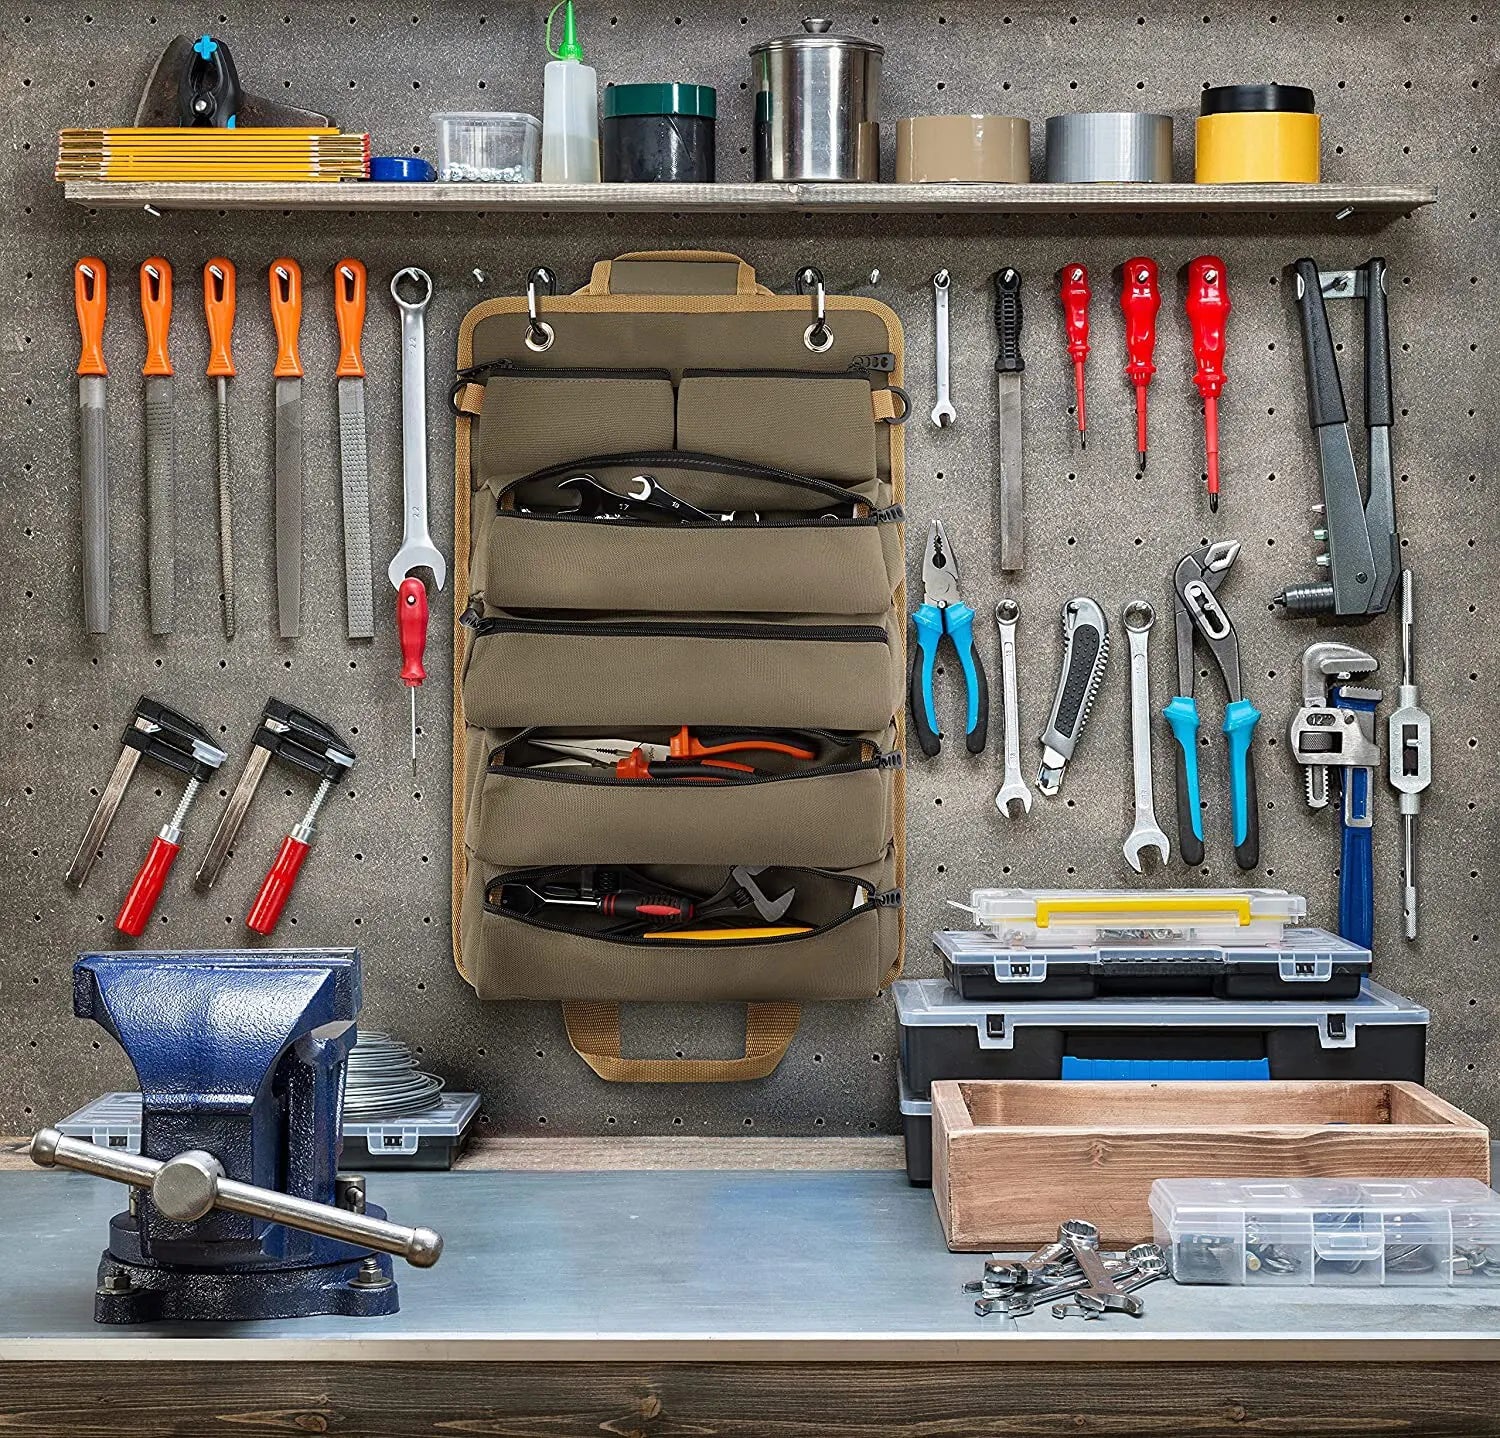 CampMate Tool Roll: Professional Rolled Portable Waterproof Storage